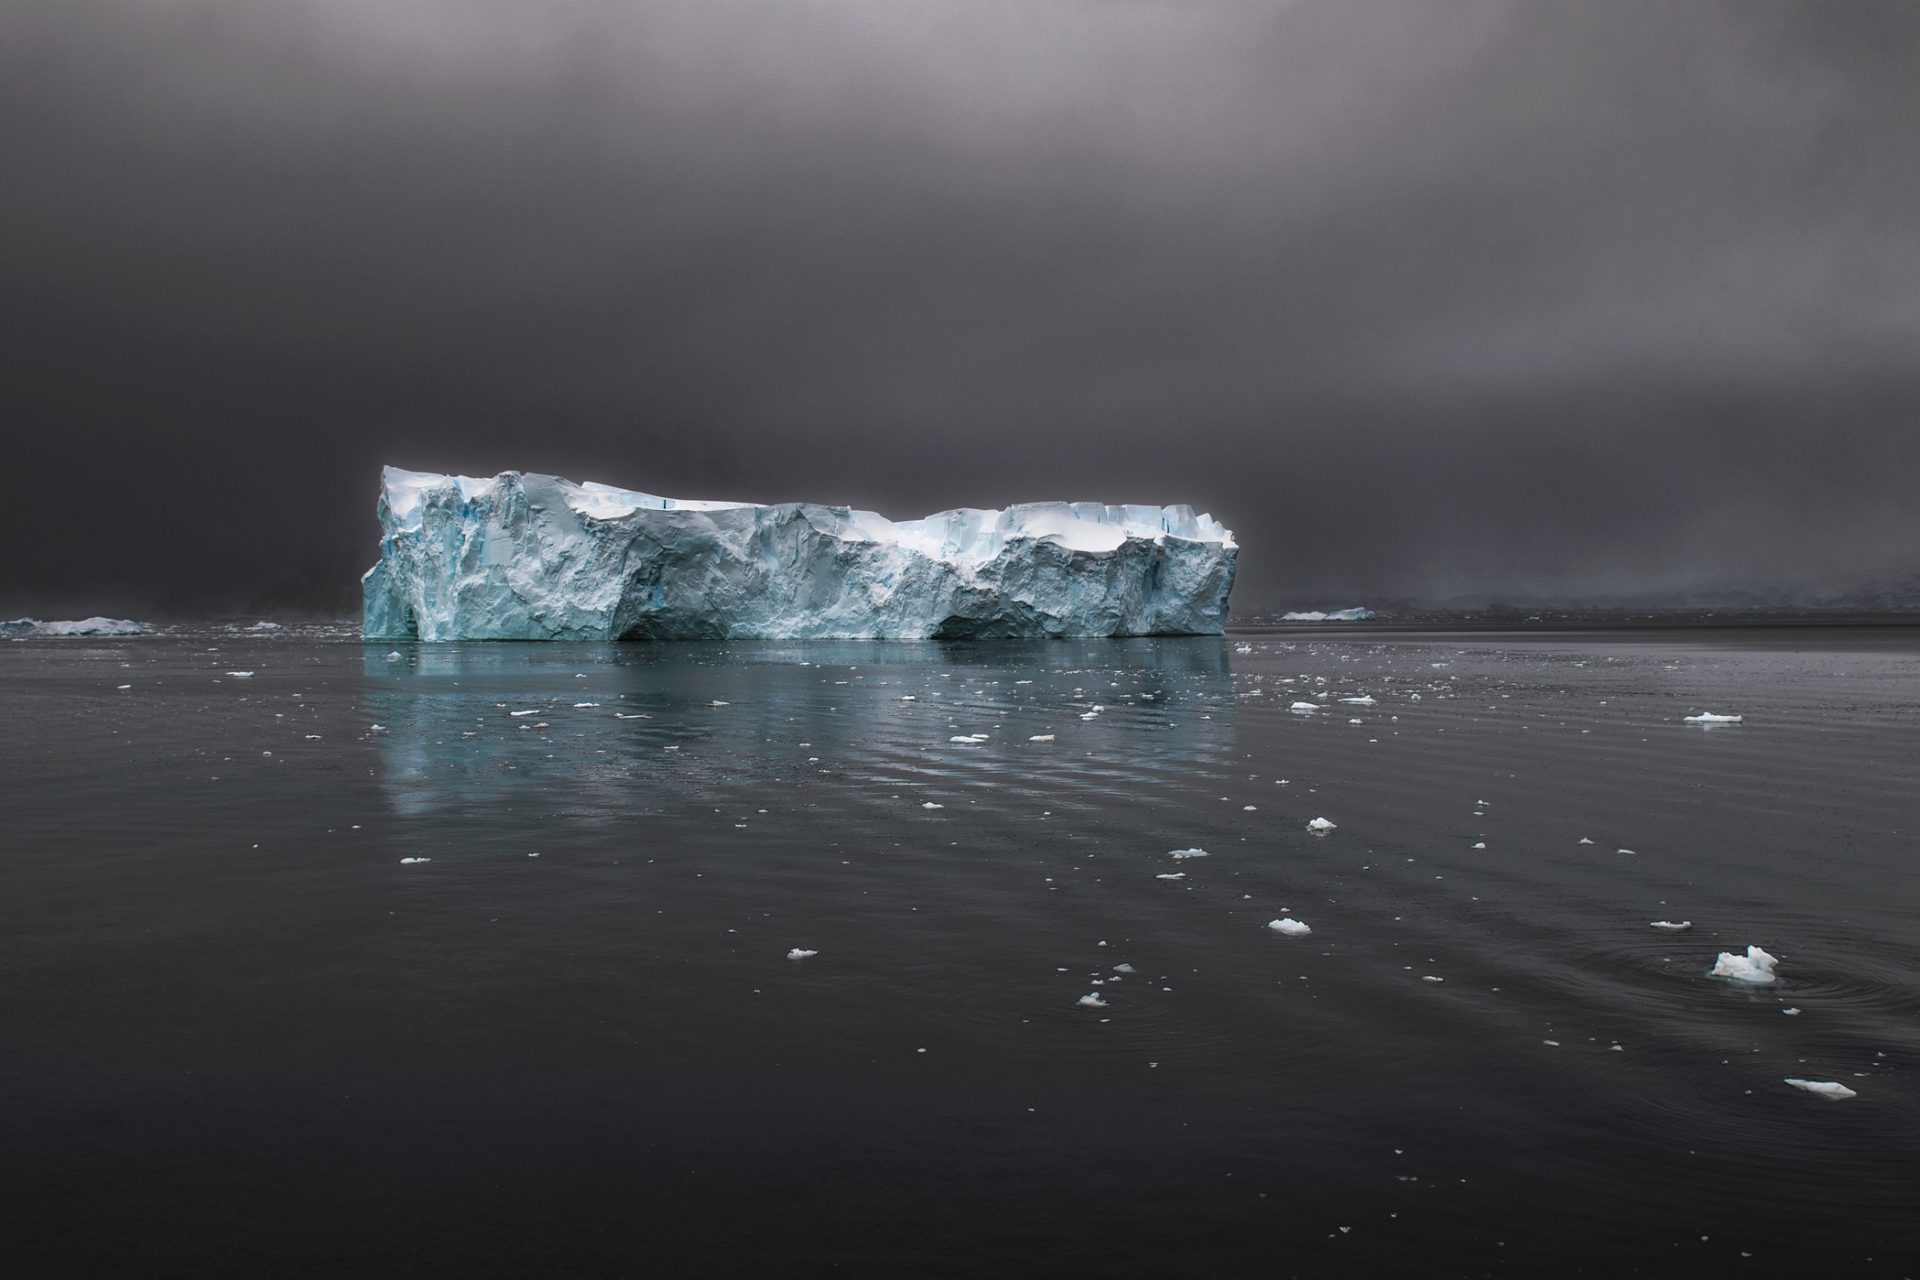 A really big iceberg is now wandering around in the ocean